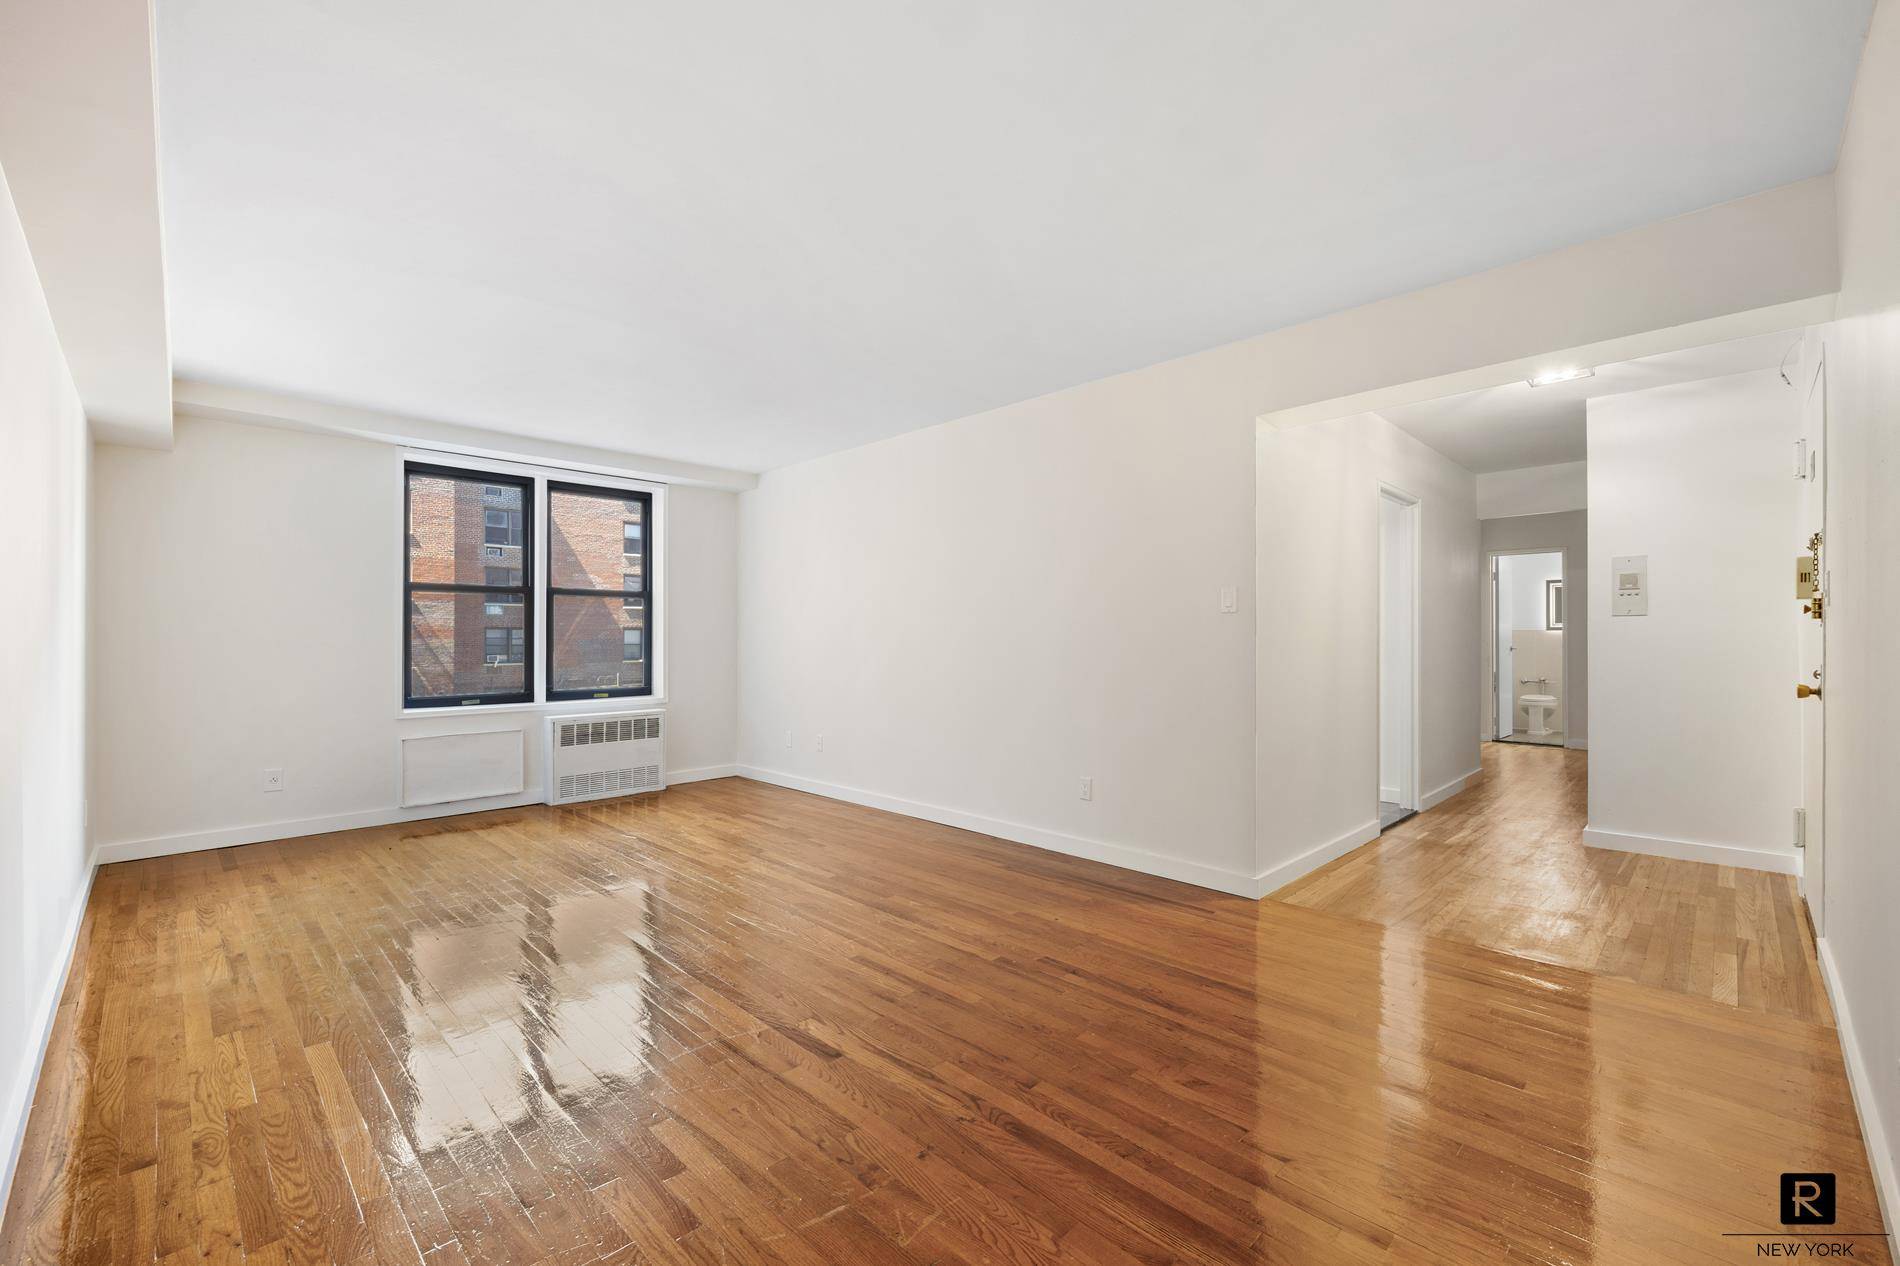 Fully Renovated 2BR 1BA Co op at The Pavilion, 144 63 35th Avenue, Murray Hill, Flushing !